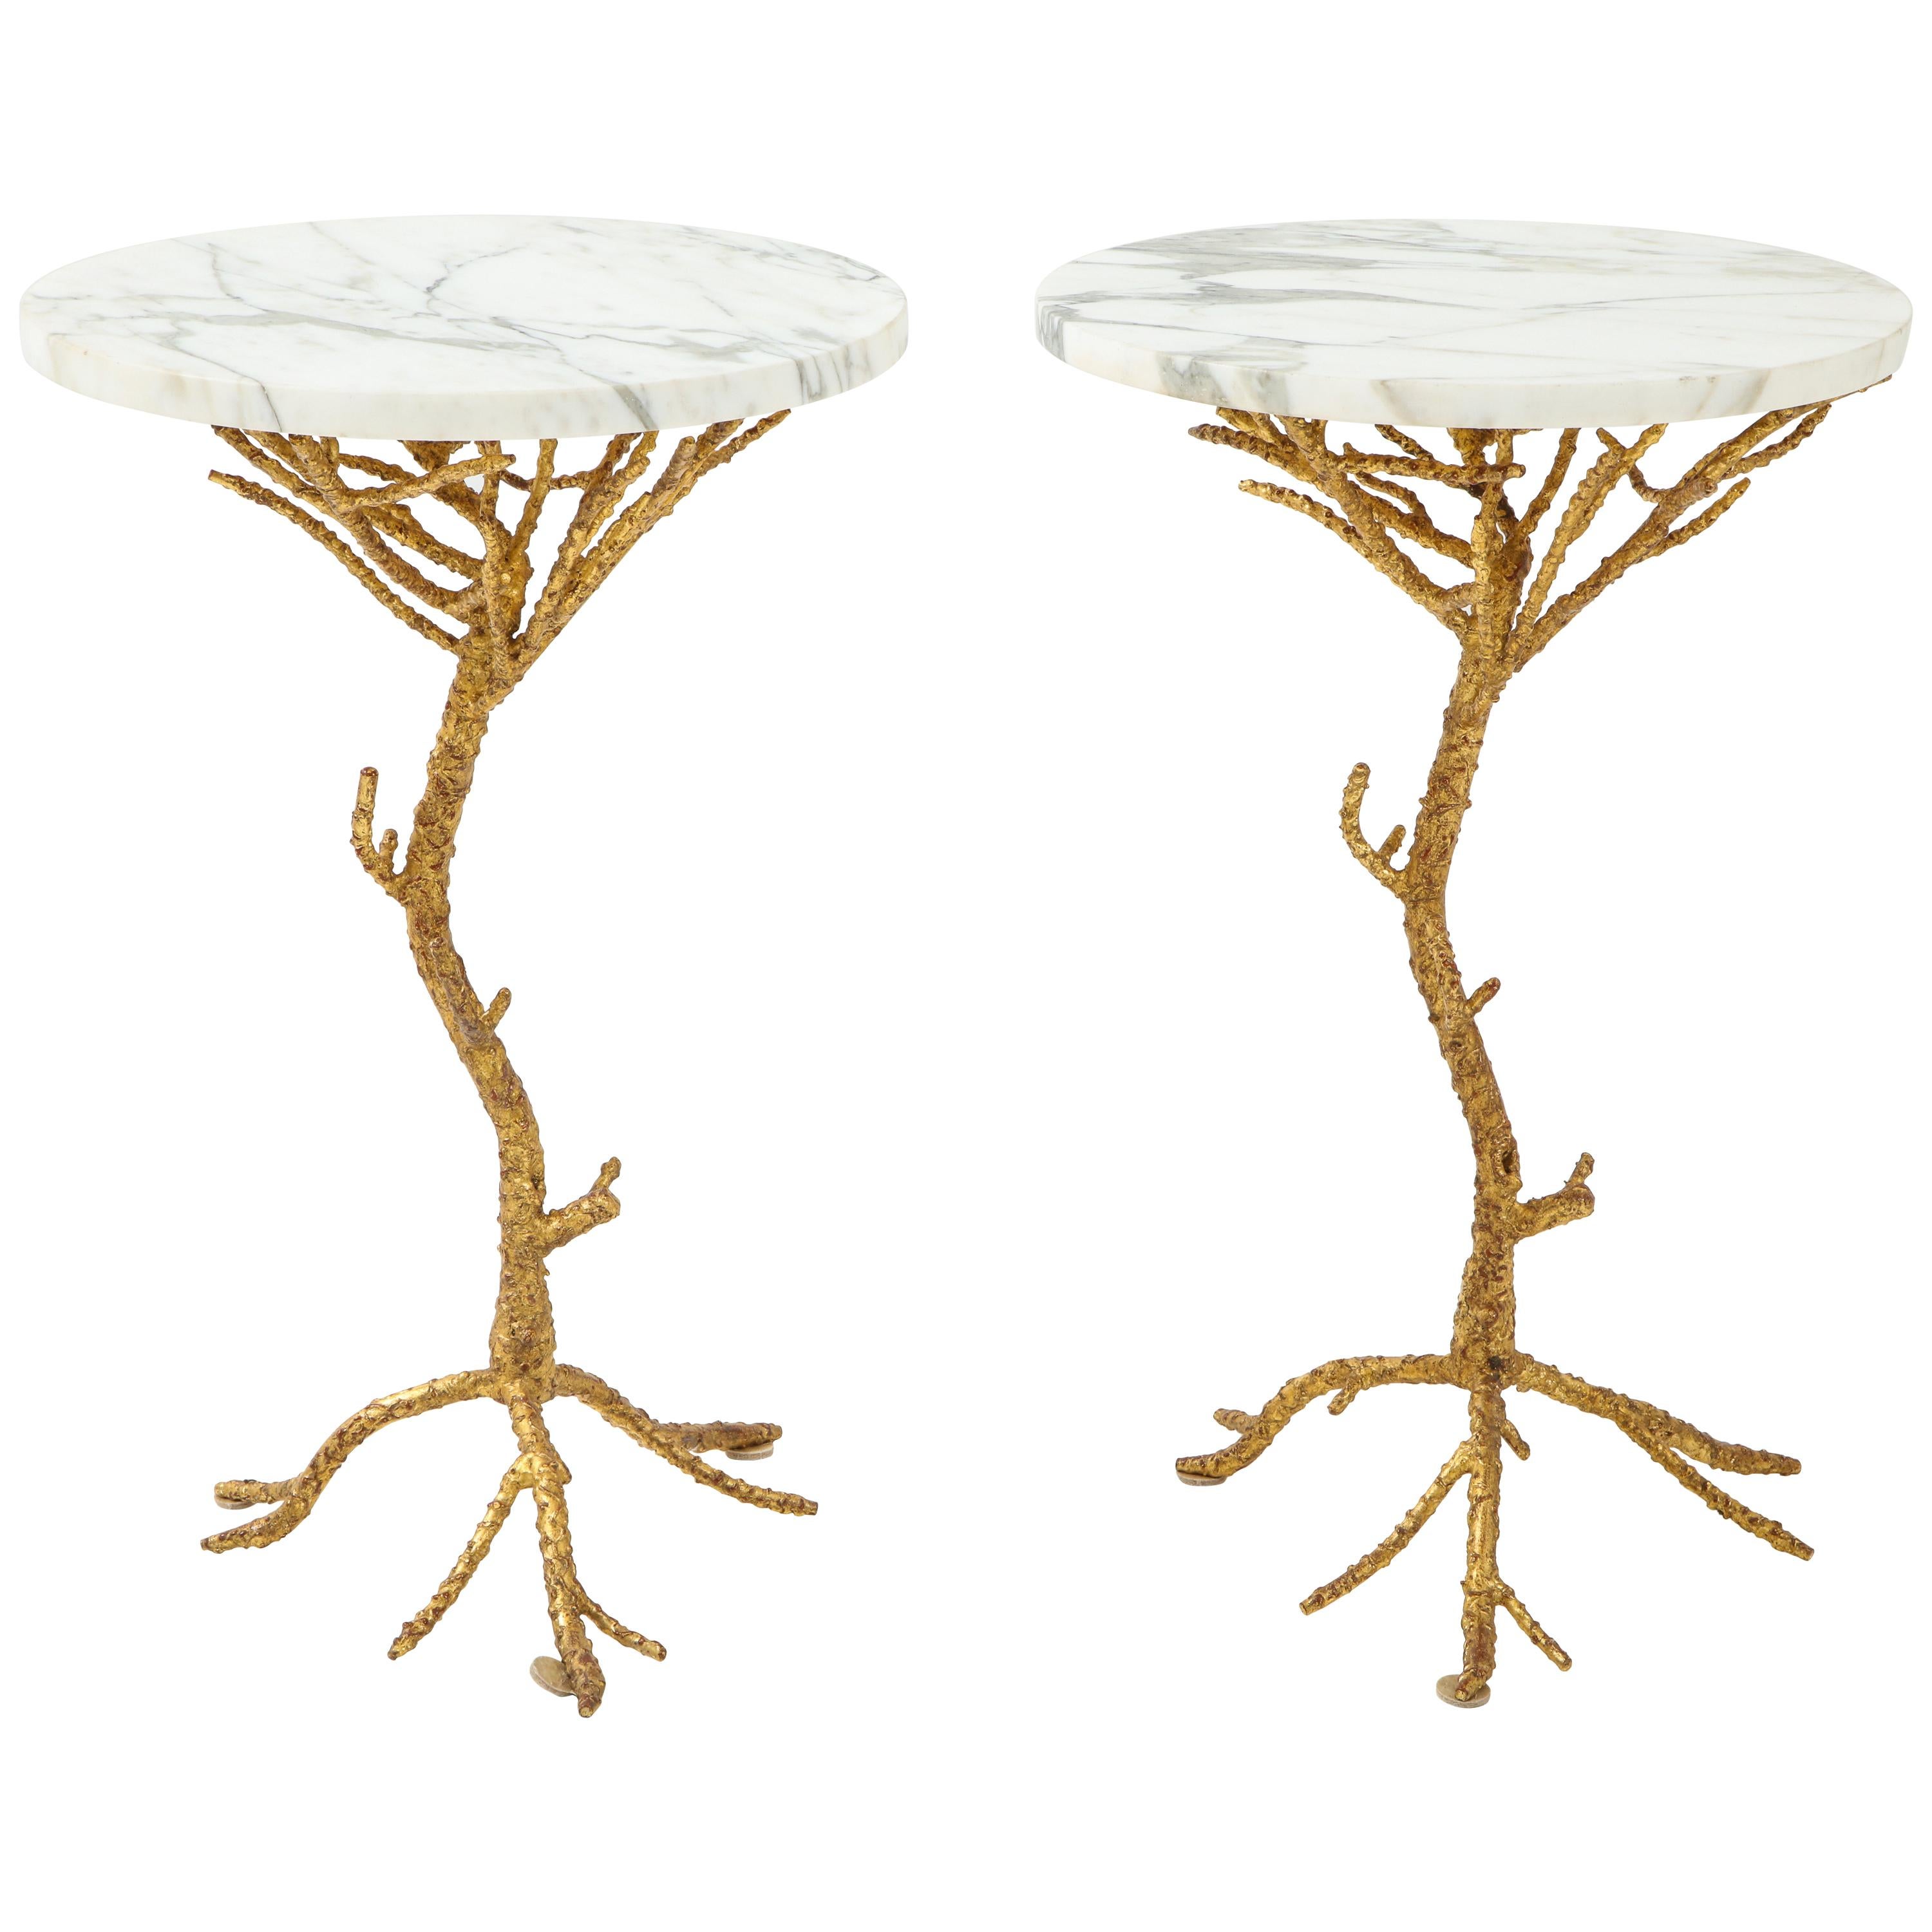 Pair of Gilt Metal Faux Bois Side Tables with Marble Top